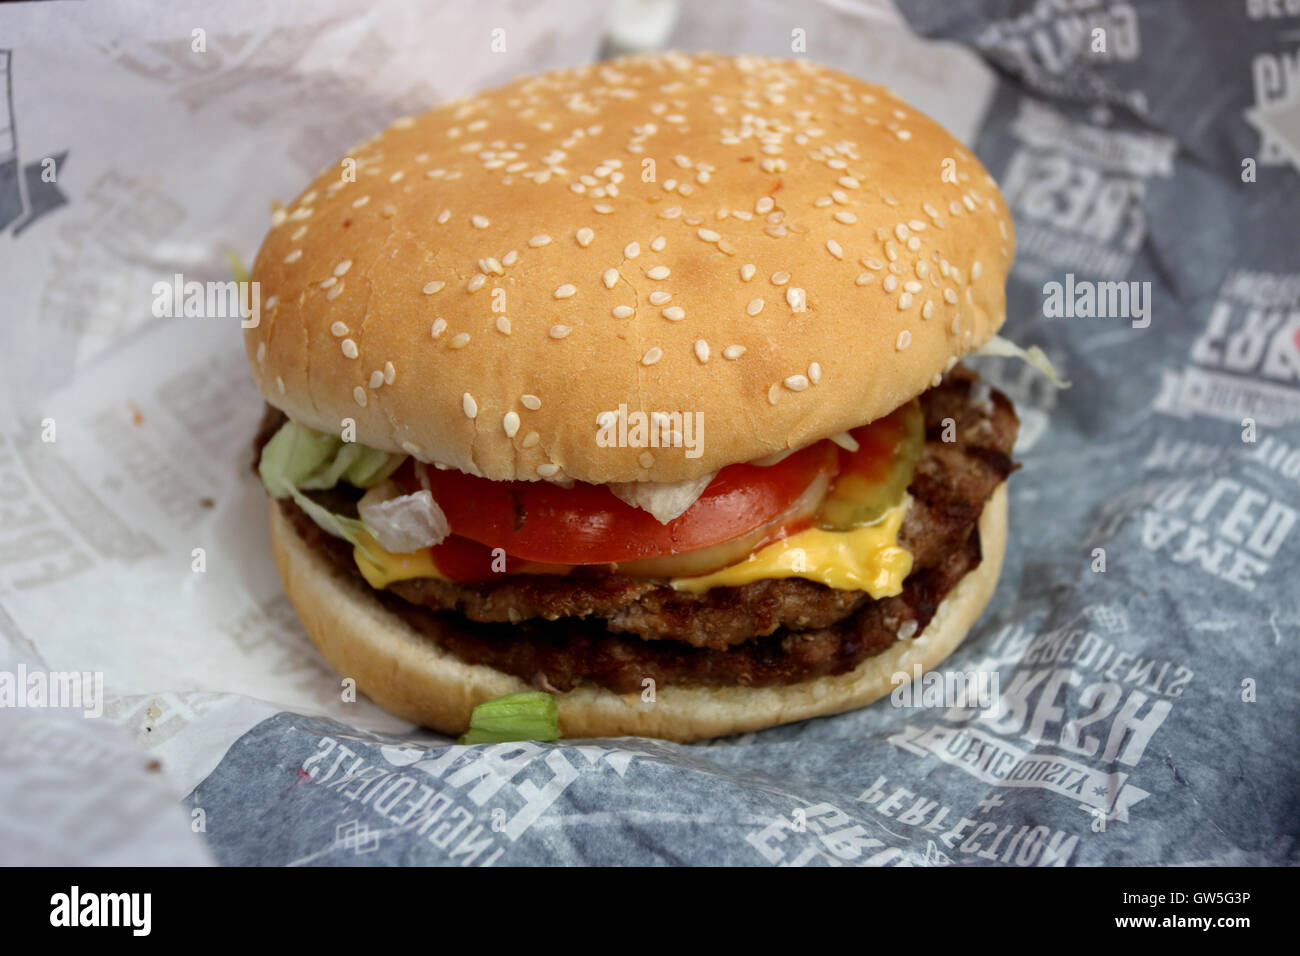 Hungry Jack's (Burger King) fast food beef burger Stock Photo